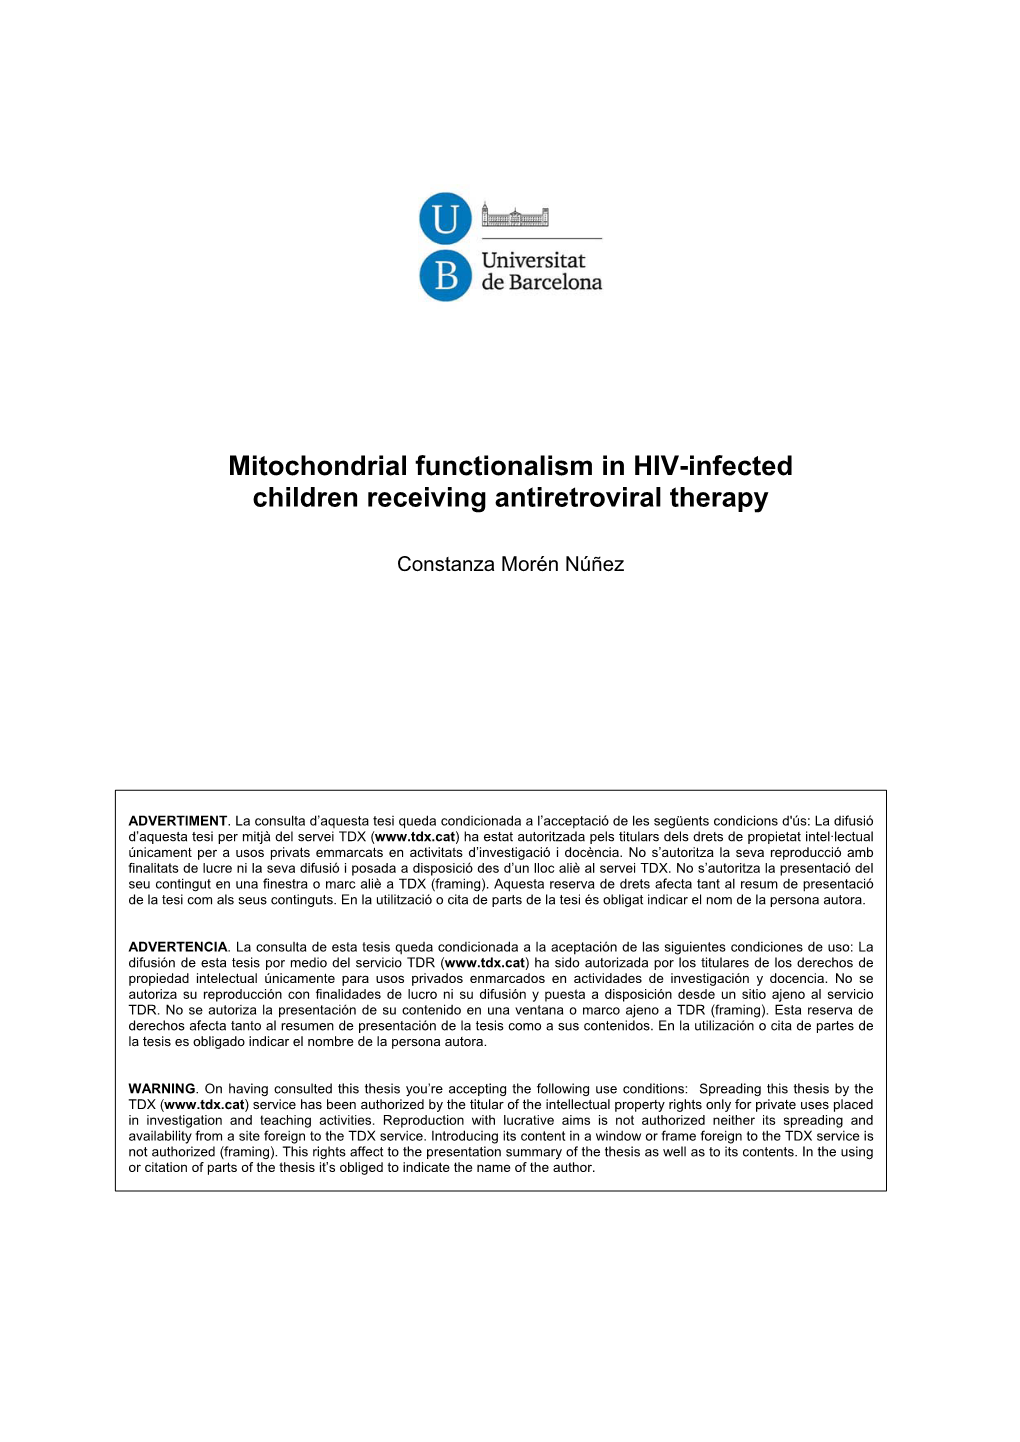 Mitochondrial Functionalism in HIV-Infected Children Receiving Antiretroviral Therapy